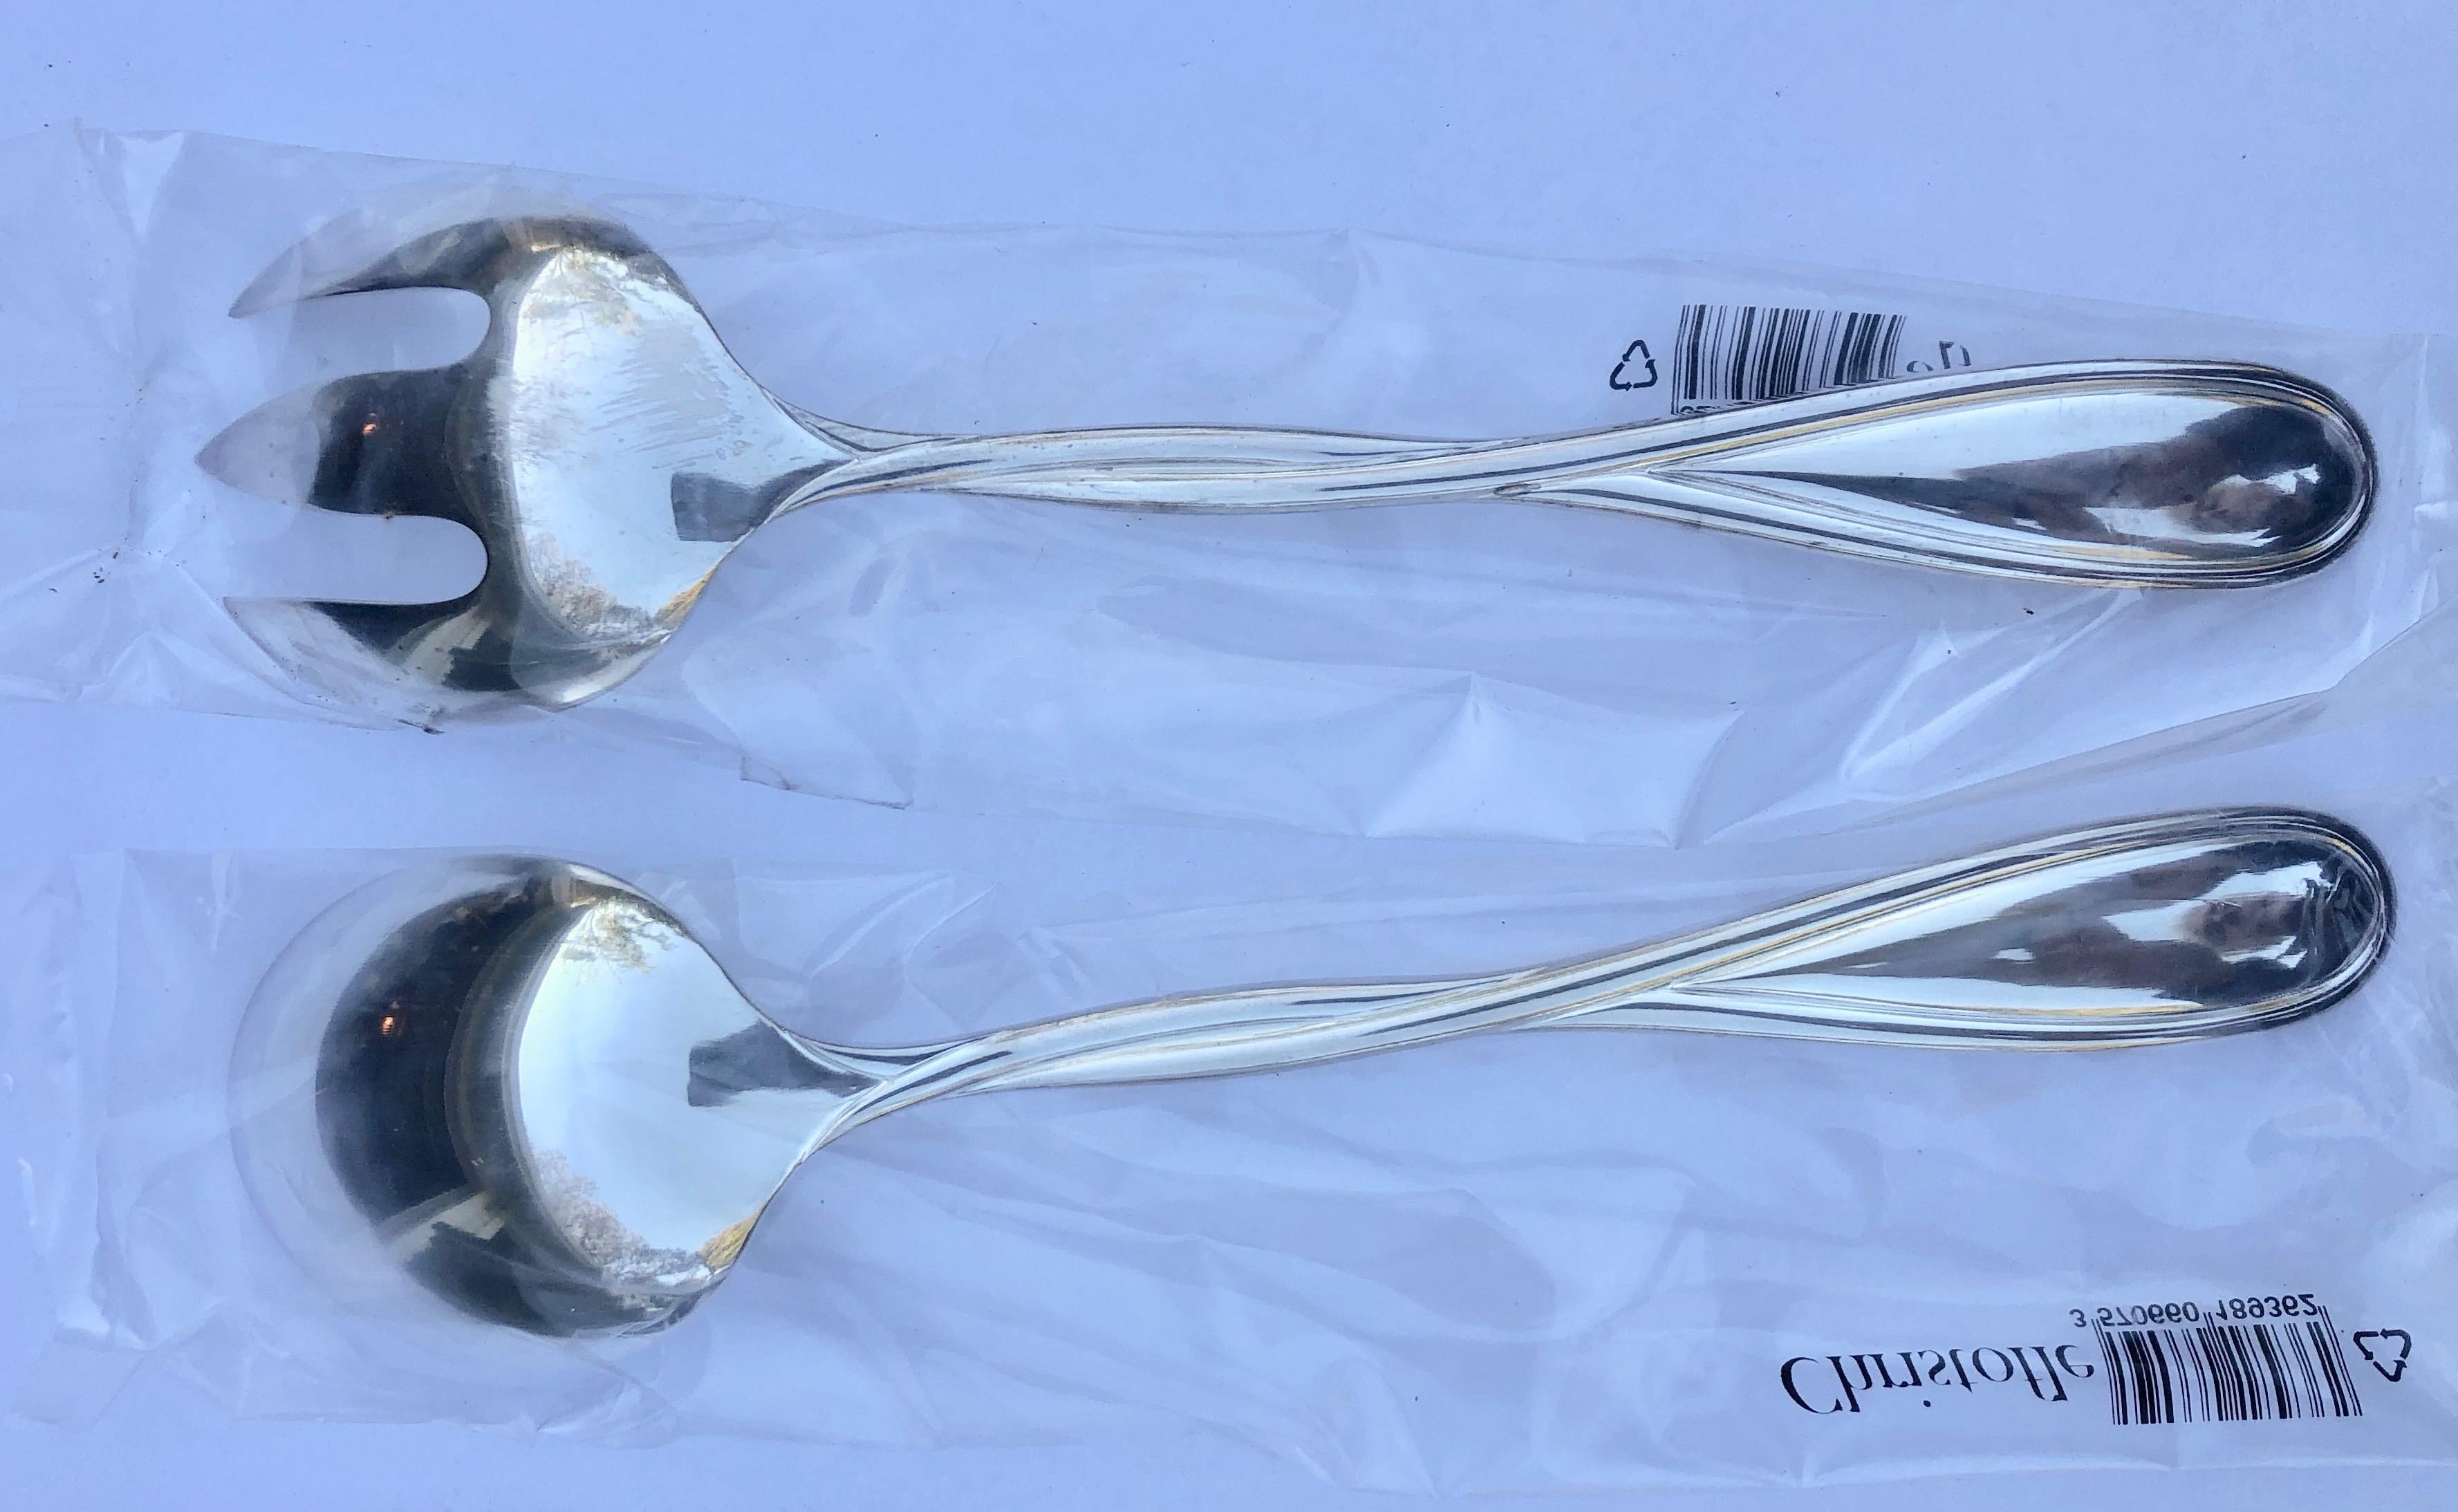 This is a beautiful French silver plated Christofle Galea set of a serving fork and spoon. There are multiple sets available for all your serving needs. All the pieces are new, never used and under their original plastic pouches and Christofle